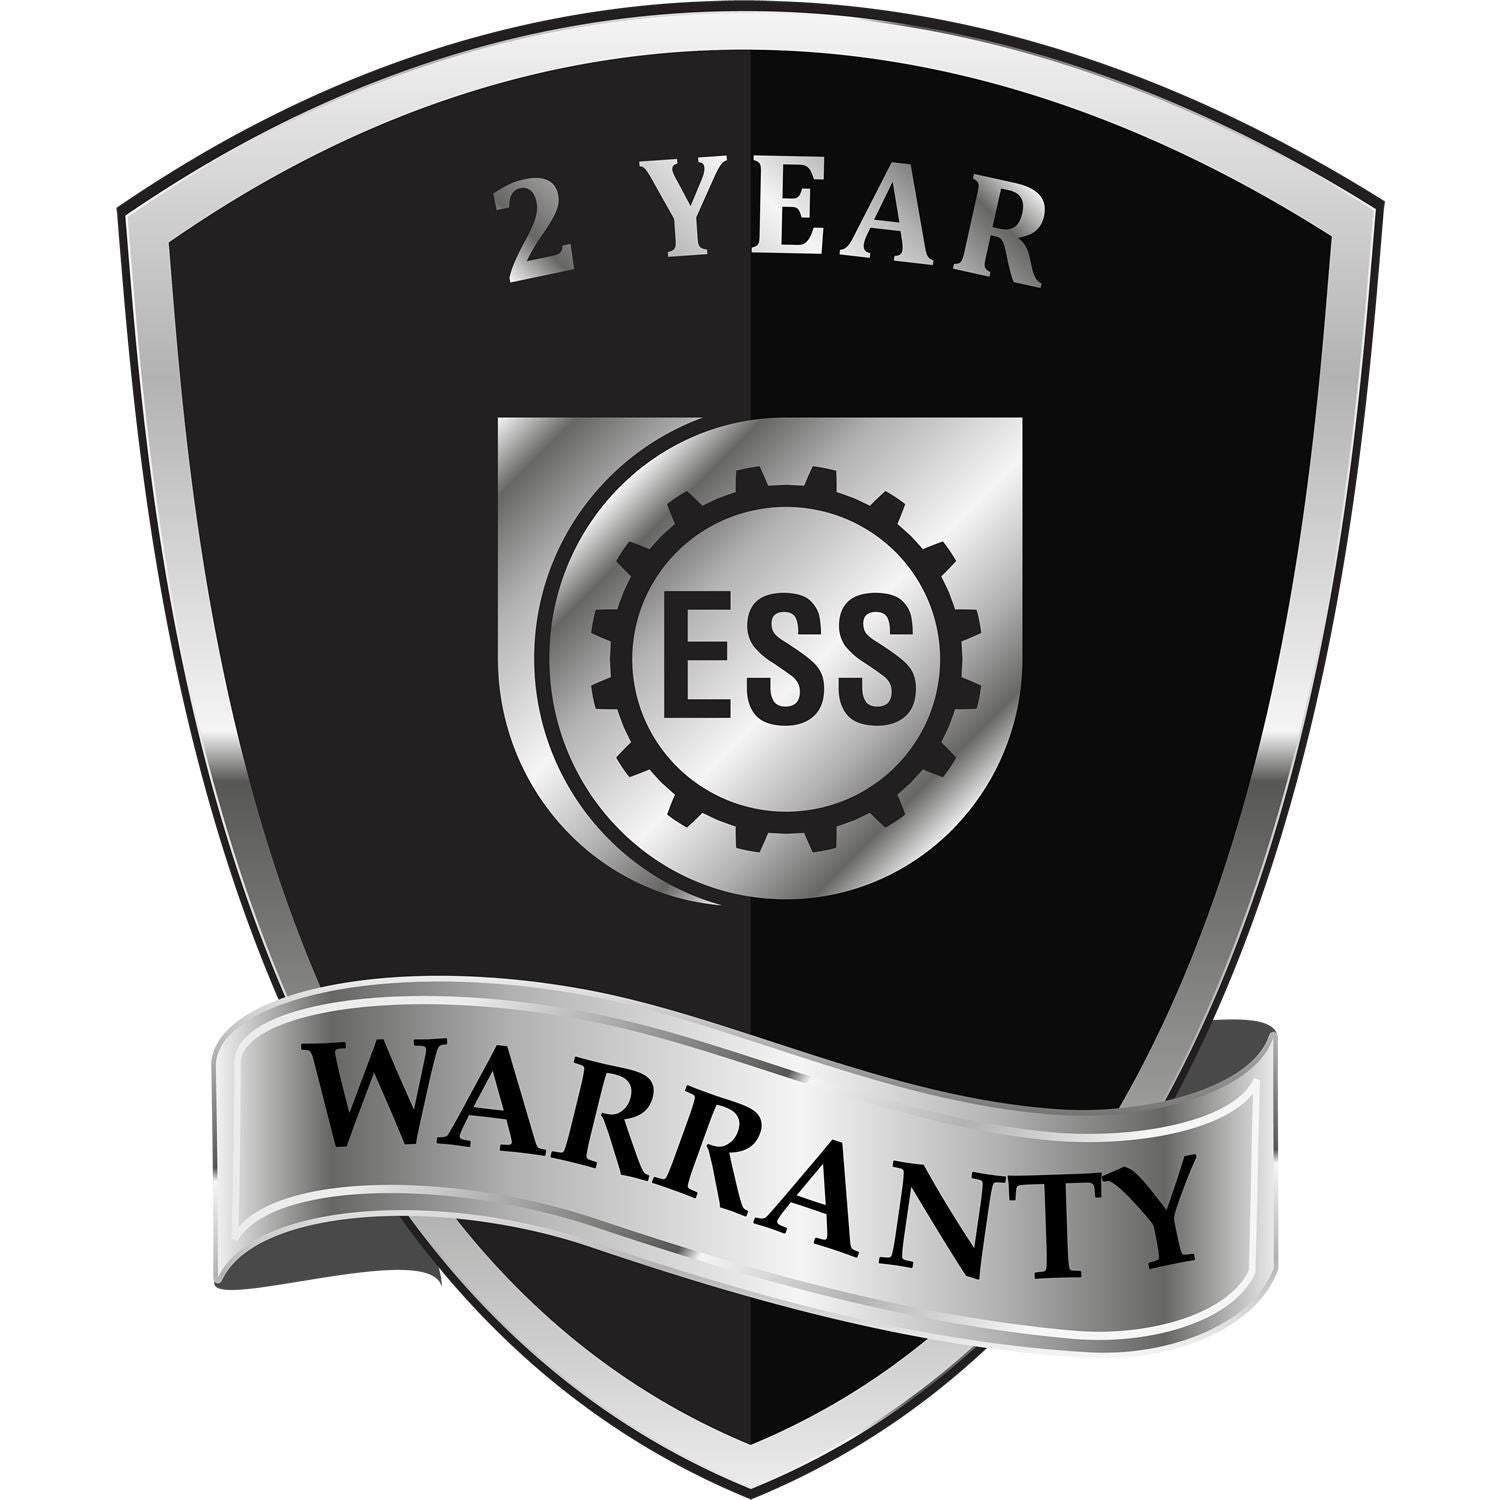 A badge or emblem showing a warranty icon for the State of Tennessee Handheld Landscape Architect Seal